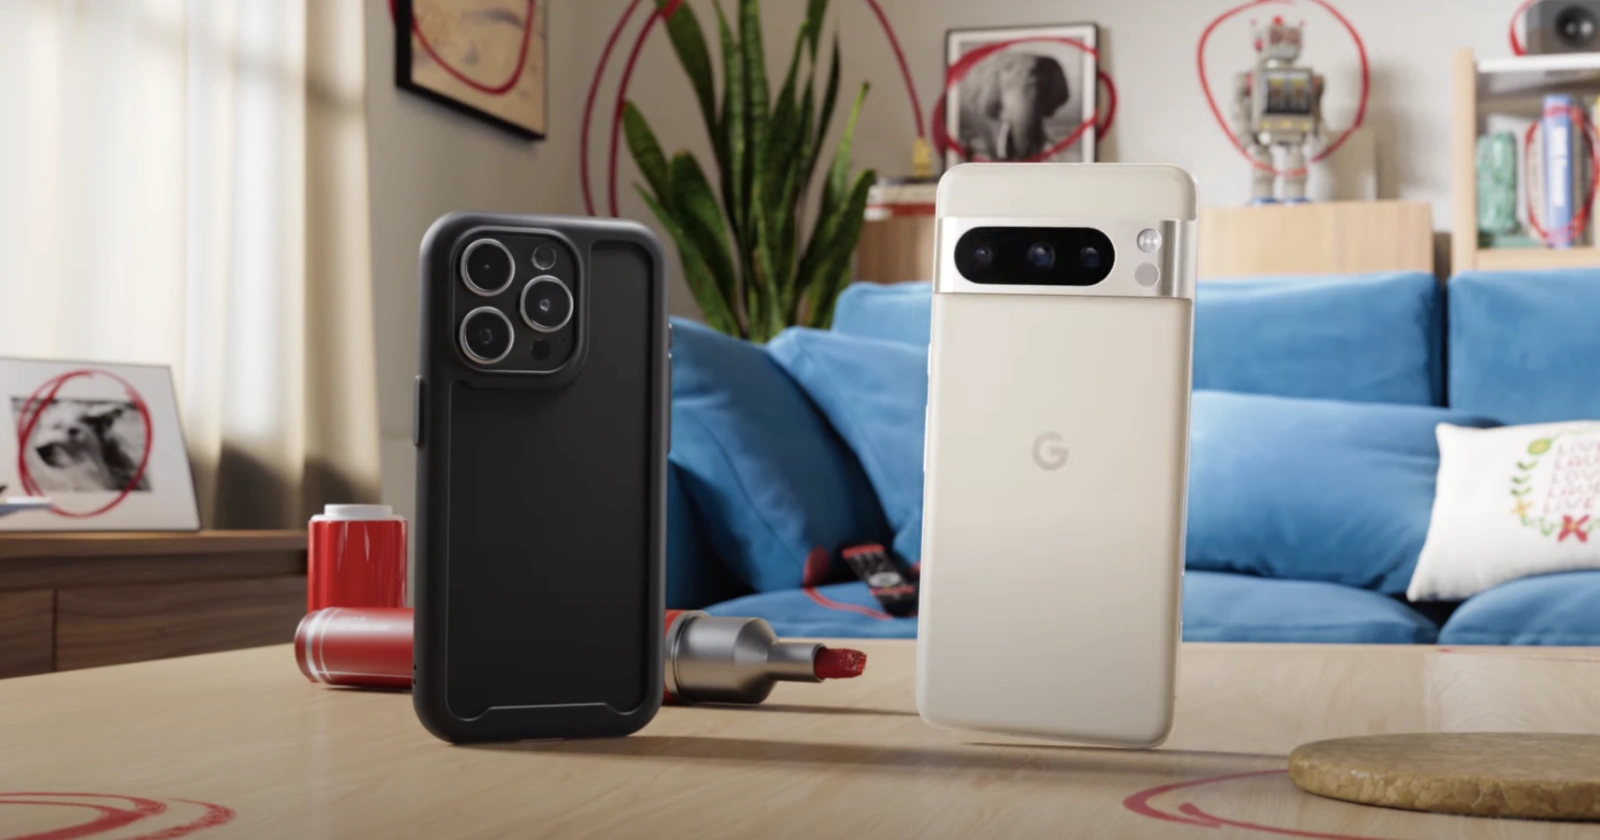 Google's latest ad is an unintended dig at the most premium smartphone in the Pixel lineup